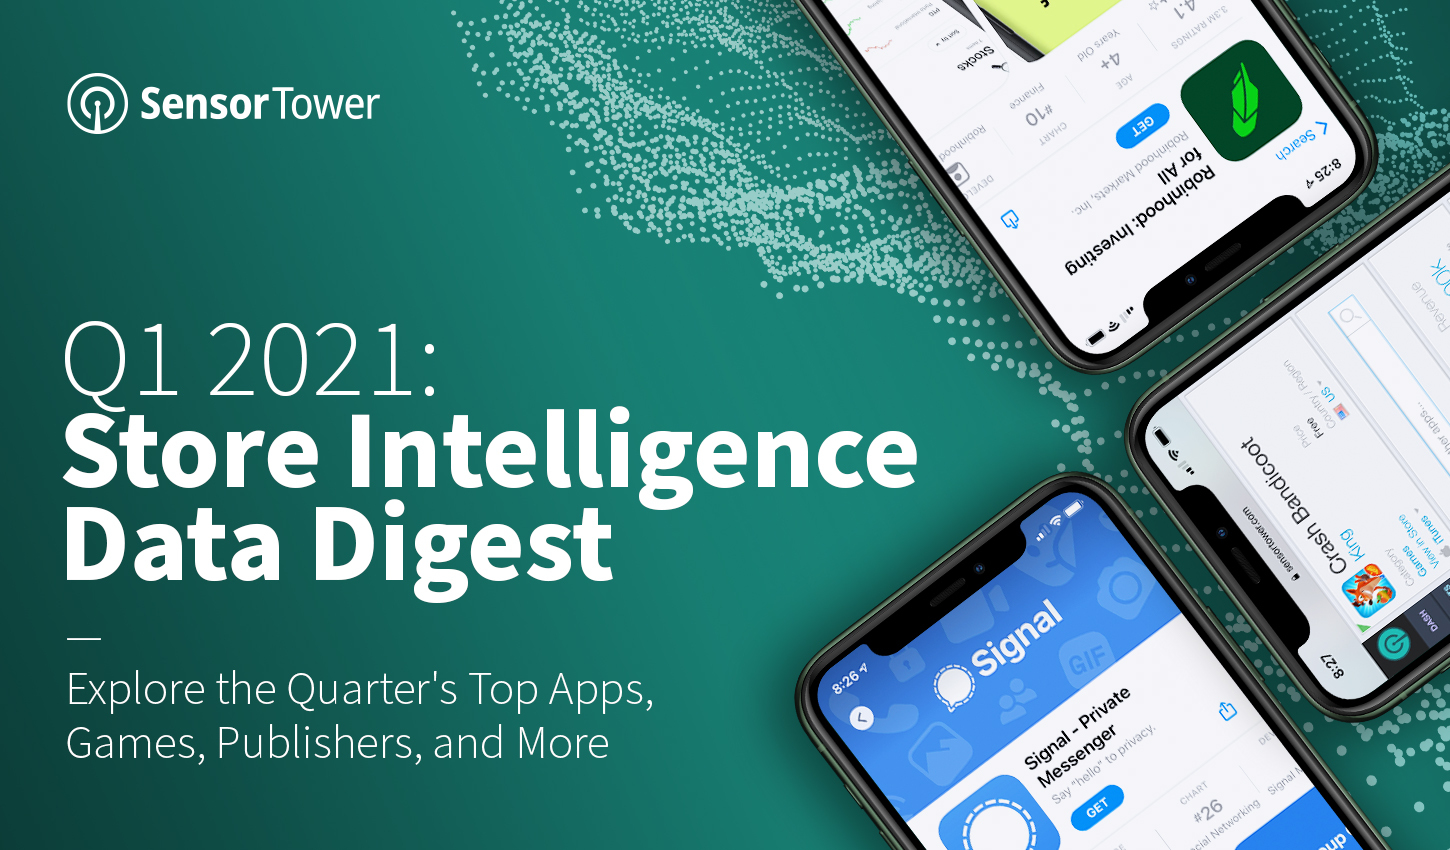 Top Finance apps in the U.S. and Europe saw 34 percent year-over-year growth in installs in Q1 2021. 